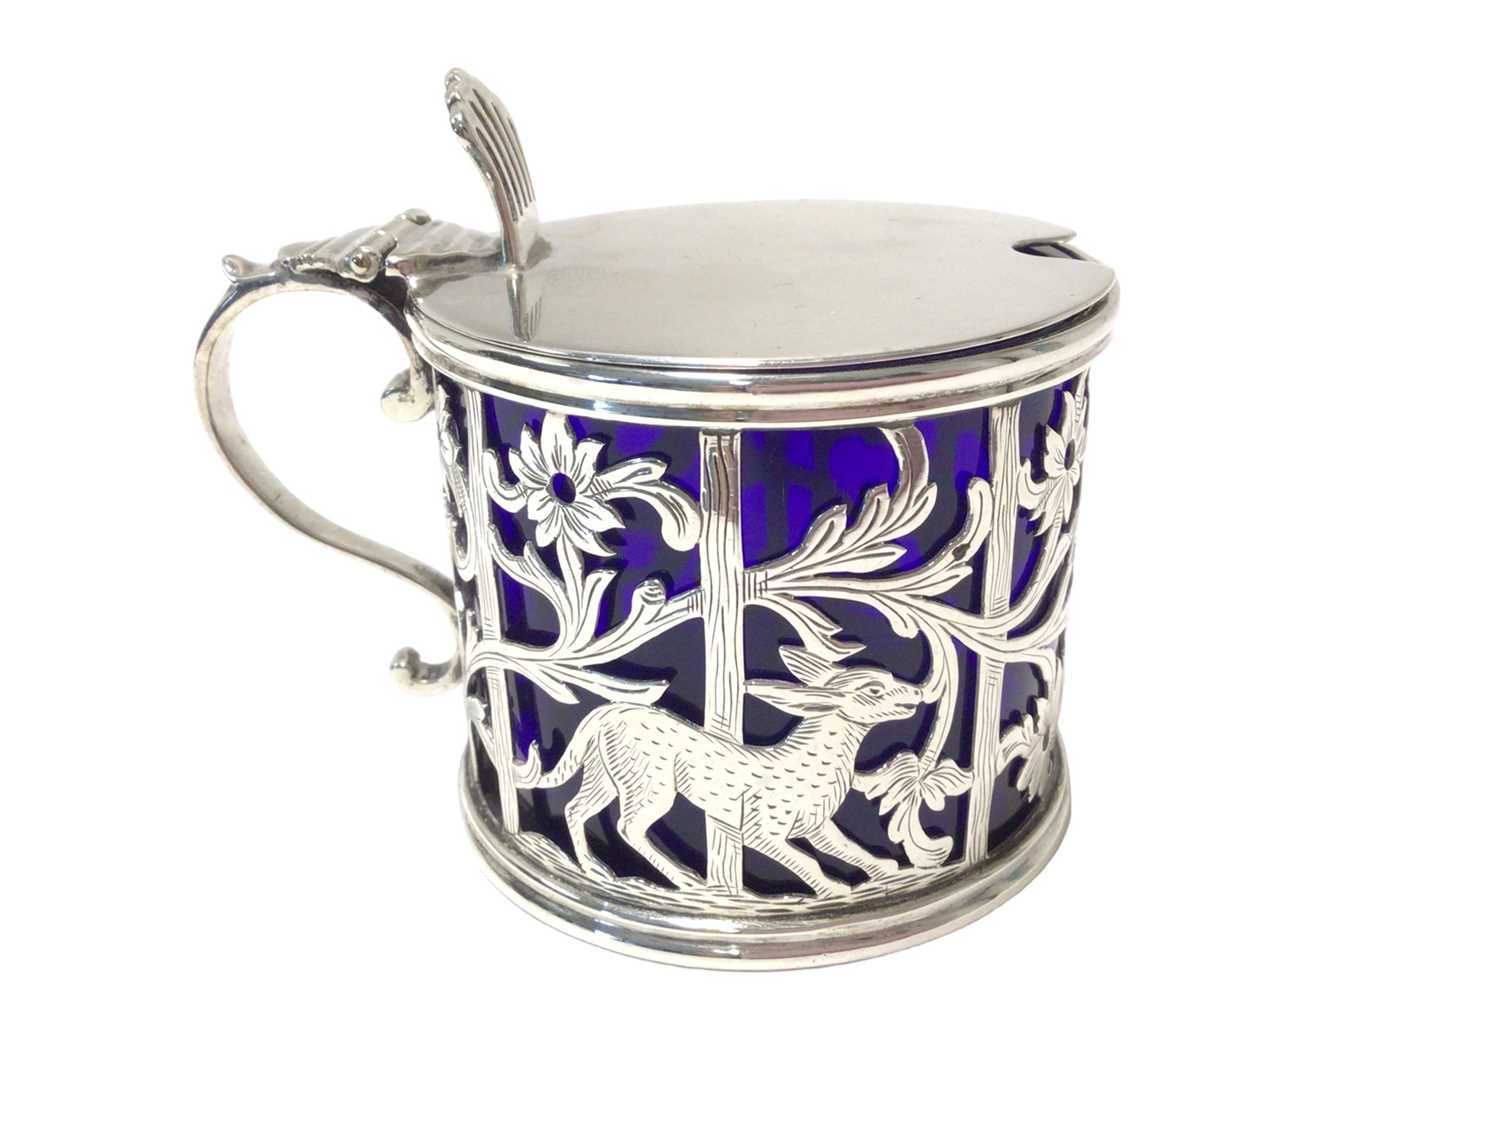 George III silver mustard pot with bird and animal decoration